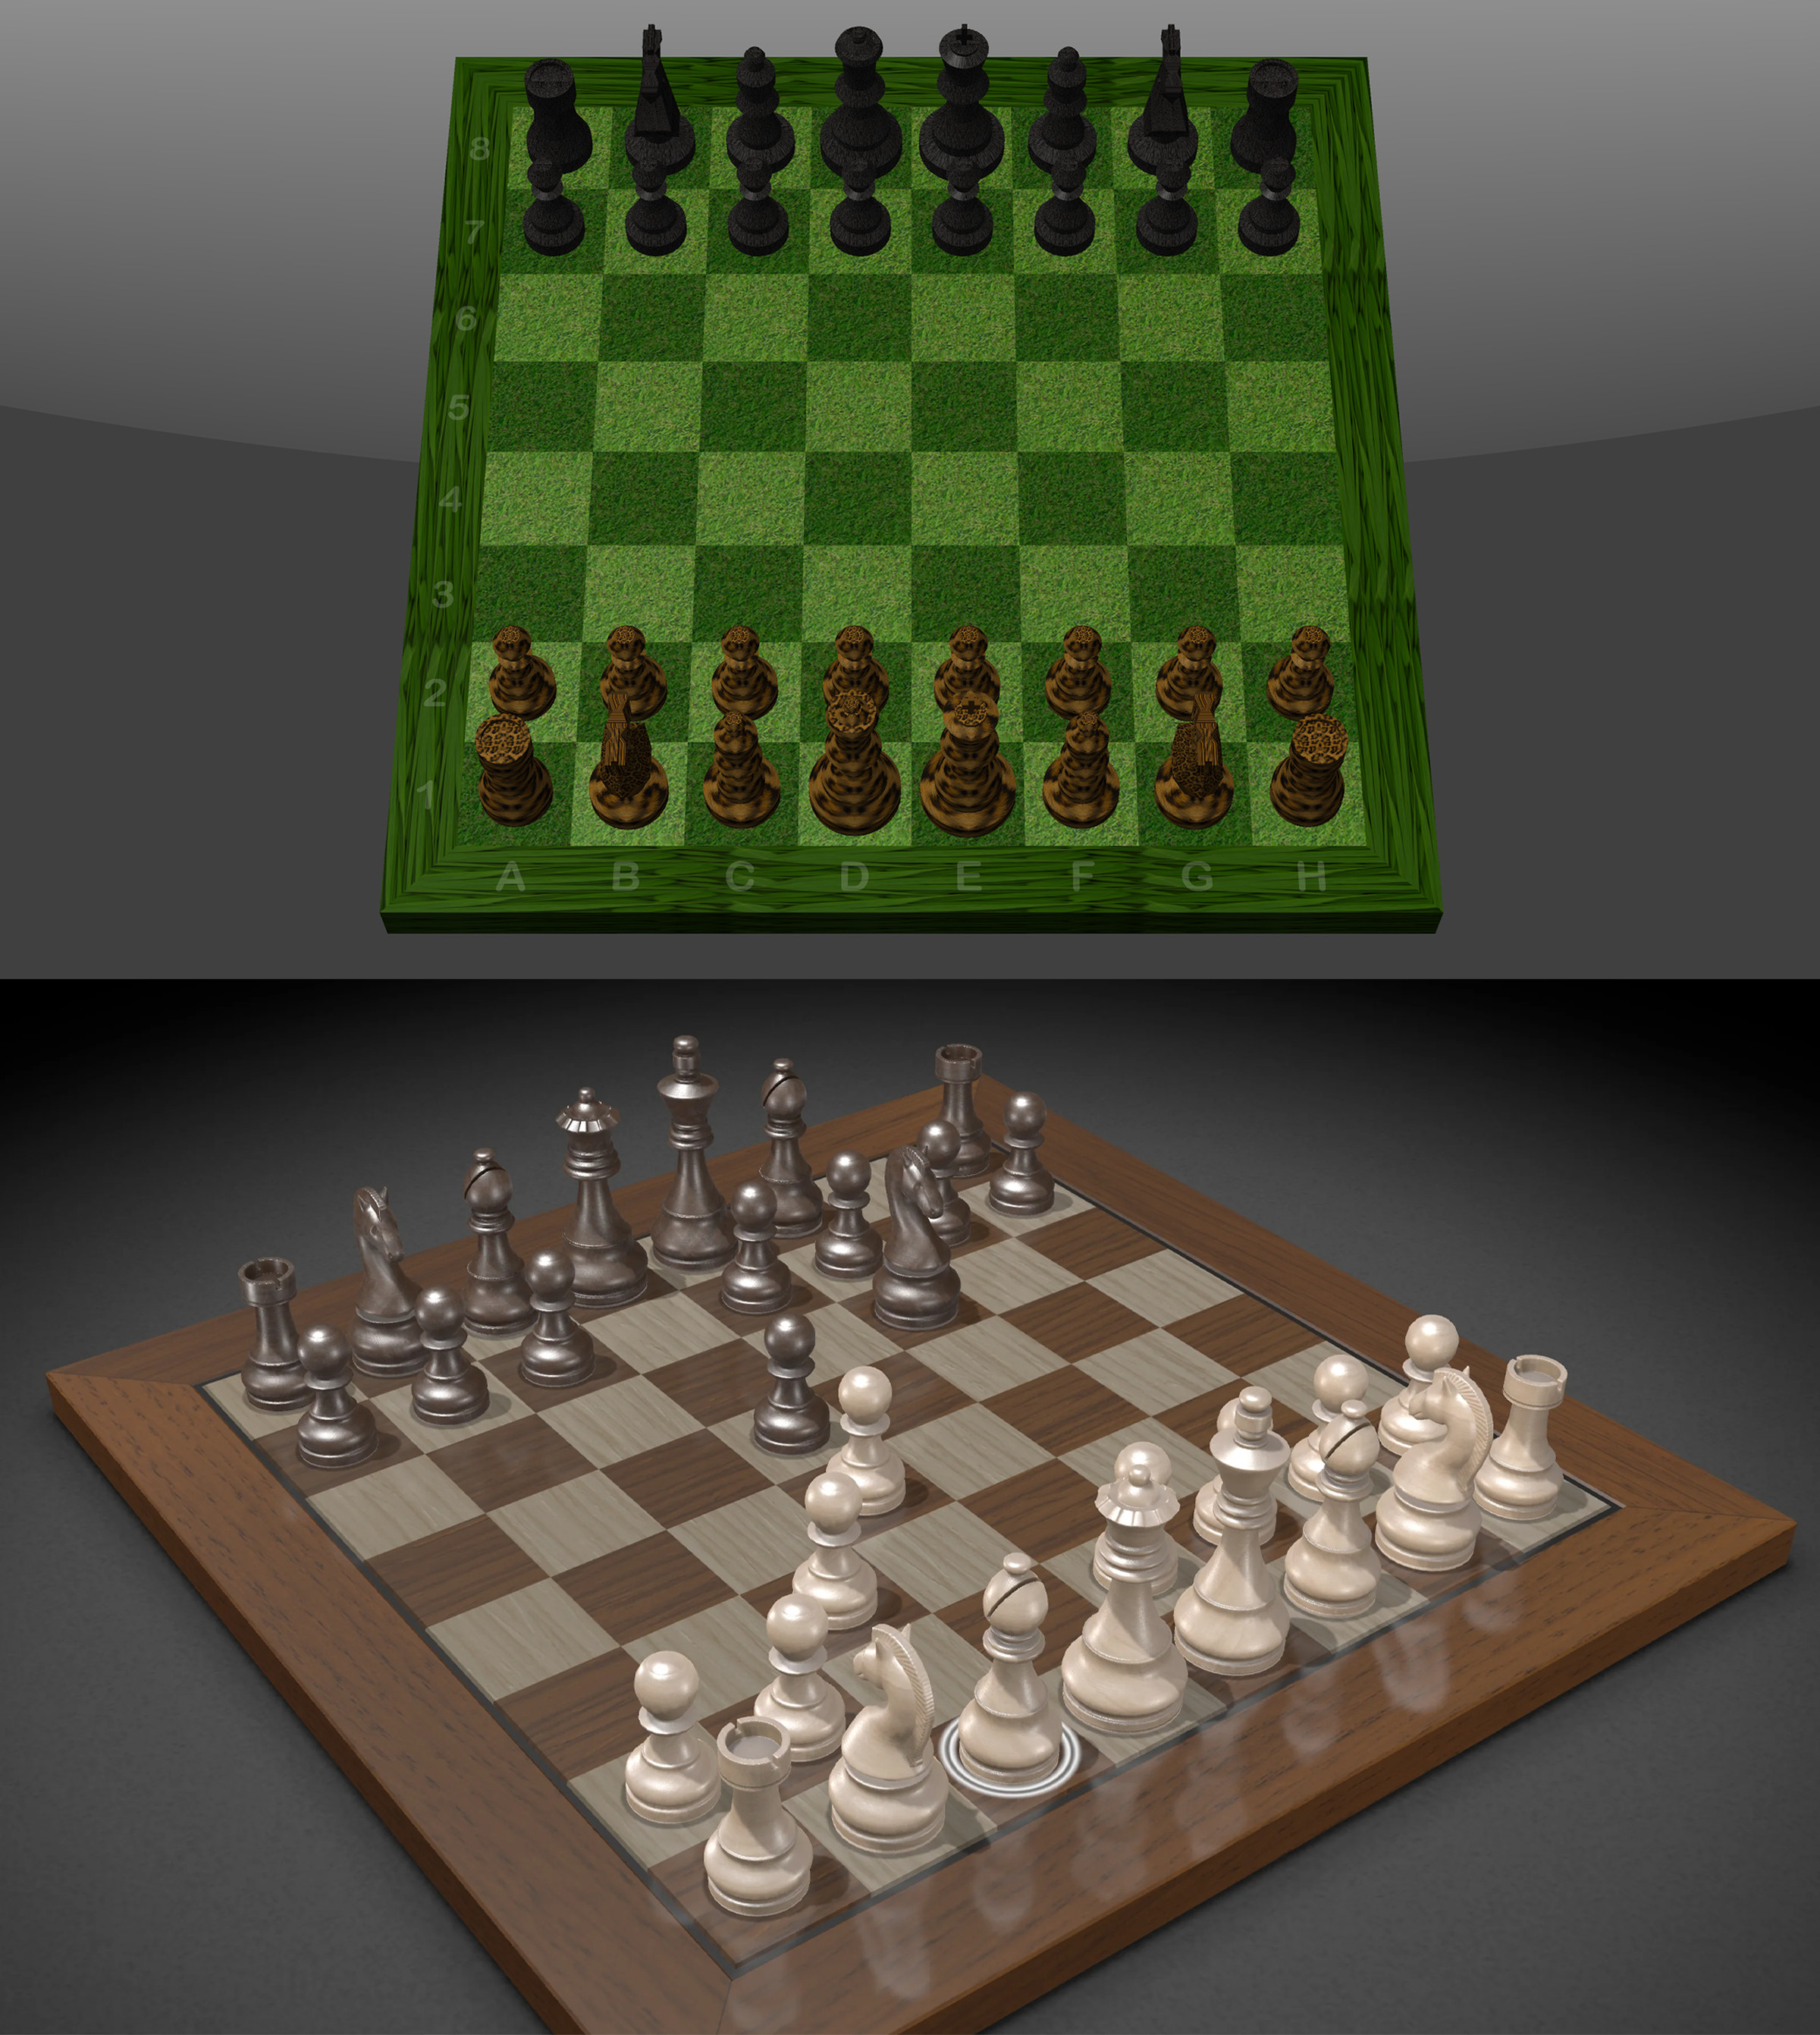 The current version with a grass board (top) versus the new version, which has shinier pieces that are reflected in the now-glossy board (bottom).